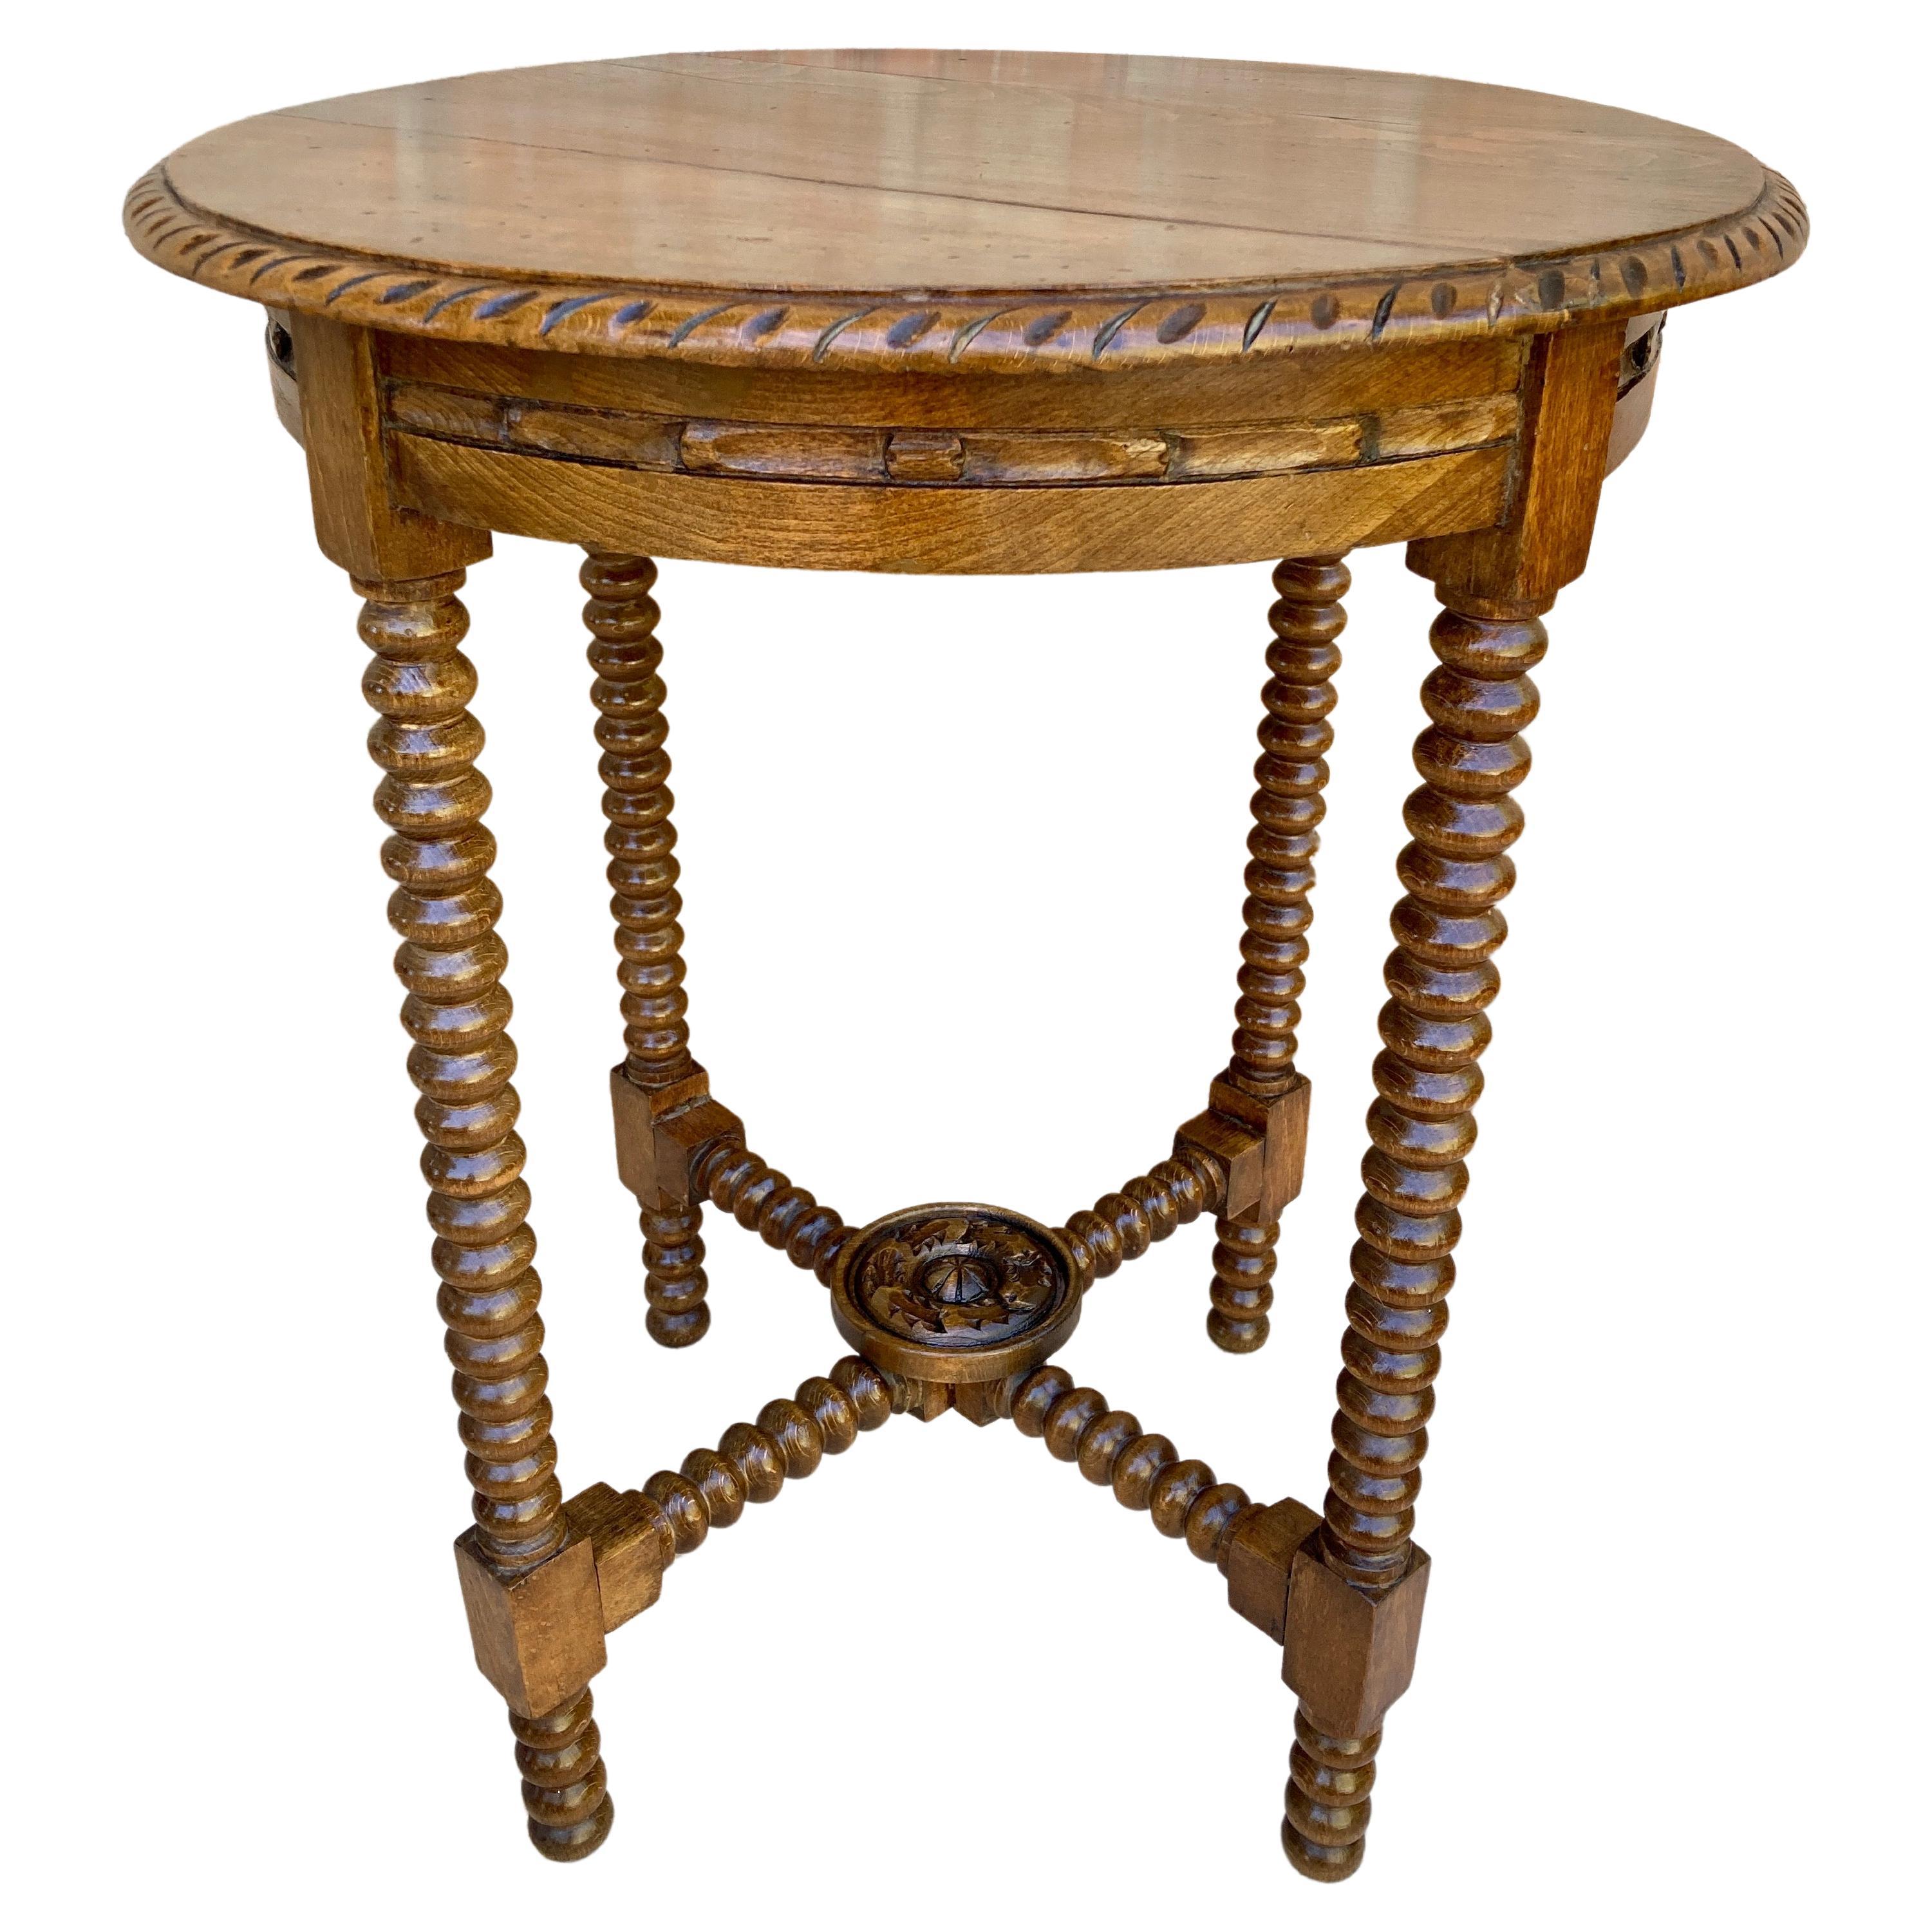 Spanish Round Walnut Side Table With Turned Legs And Beleveled Edges 1900s